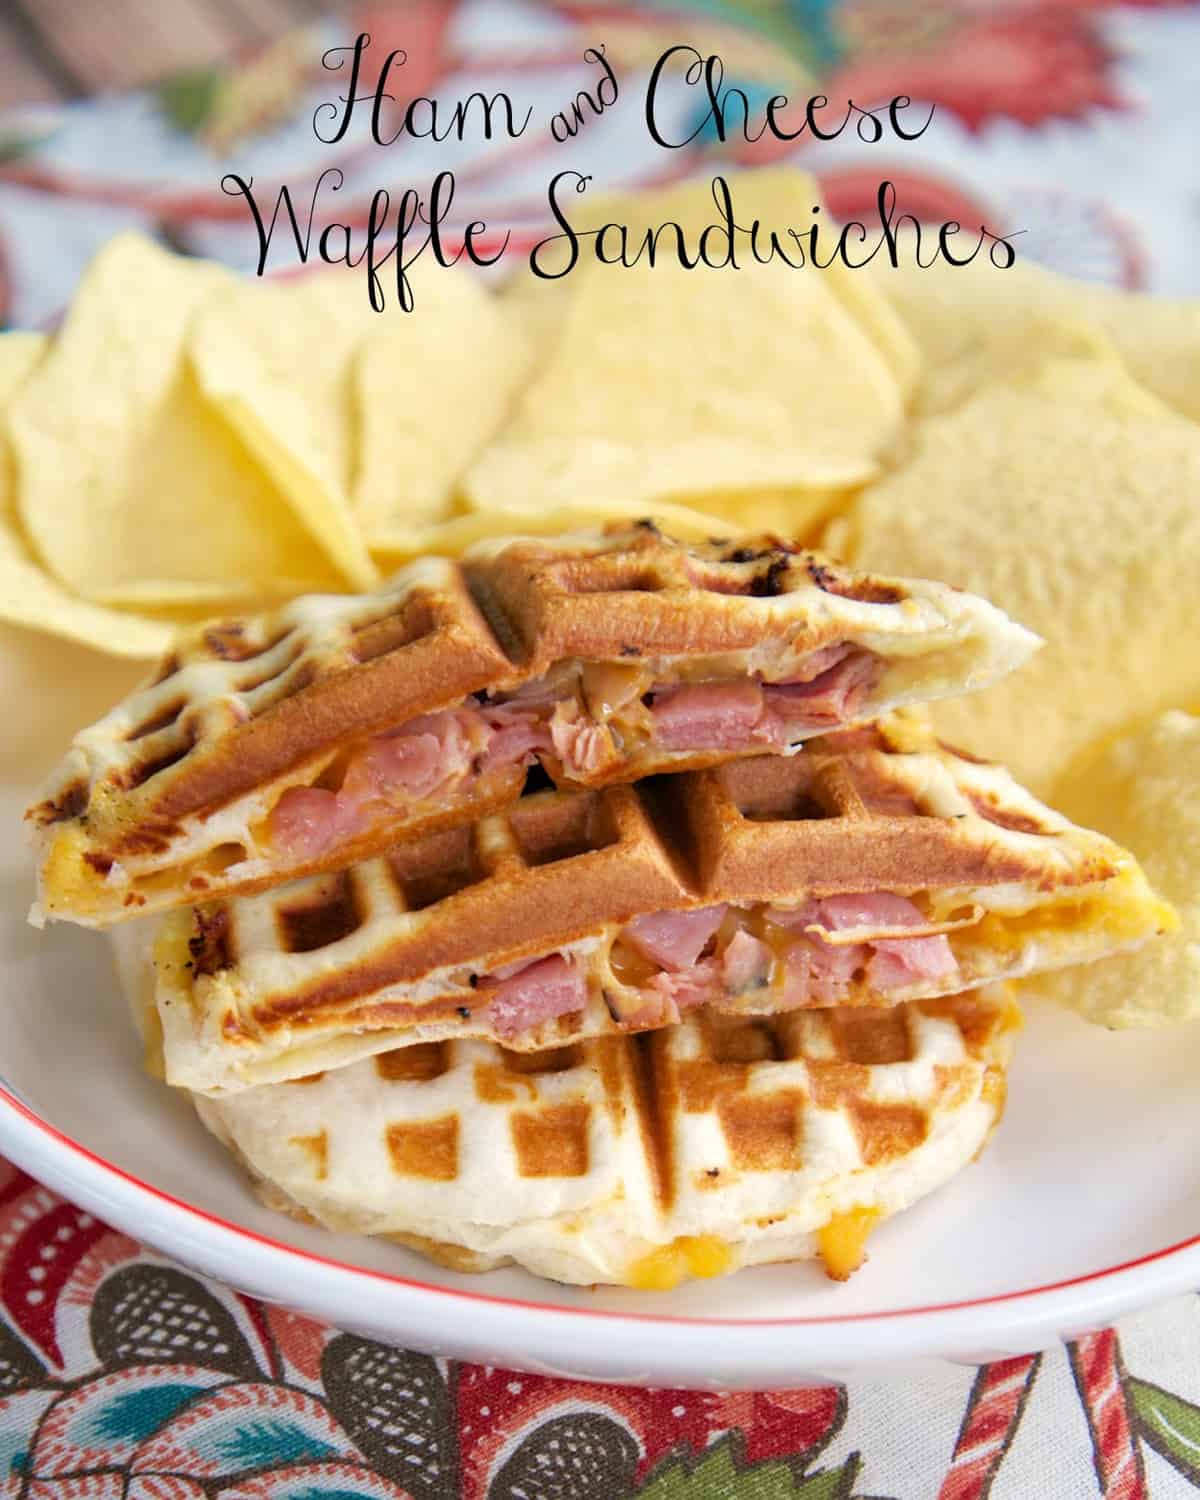 Ham & Cheese Waffle Sandwiches Recipe - ham and cheese stuffed inside a refrigerated biscuit and cooked in the waffle iron. SO much fun to eat!!